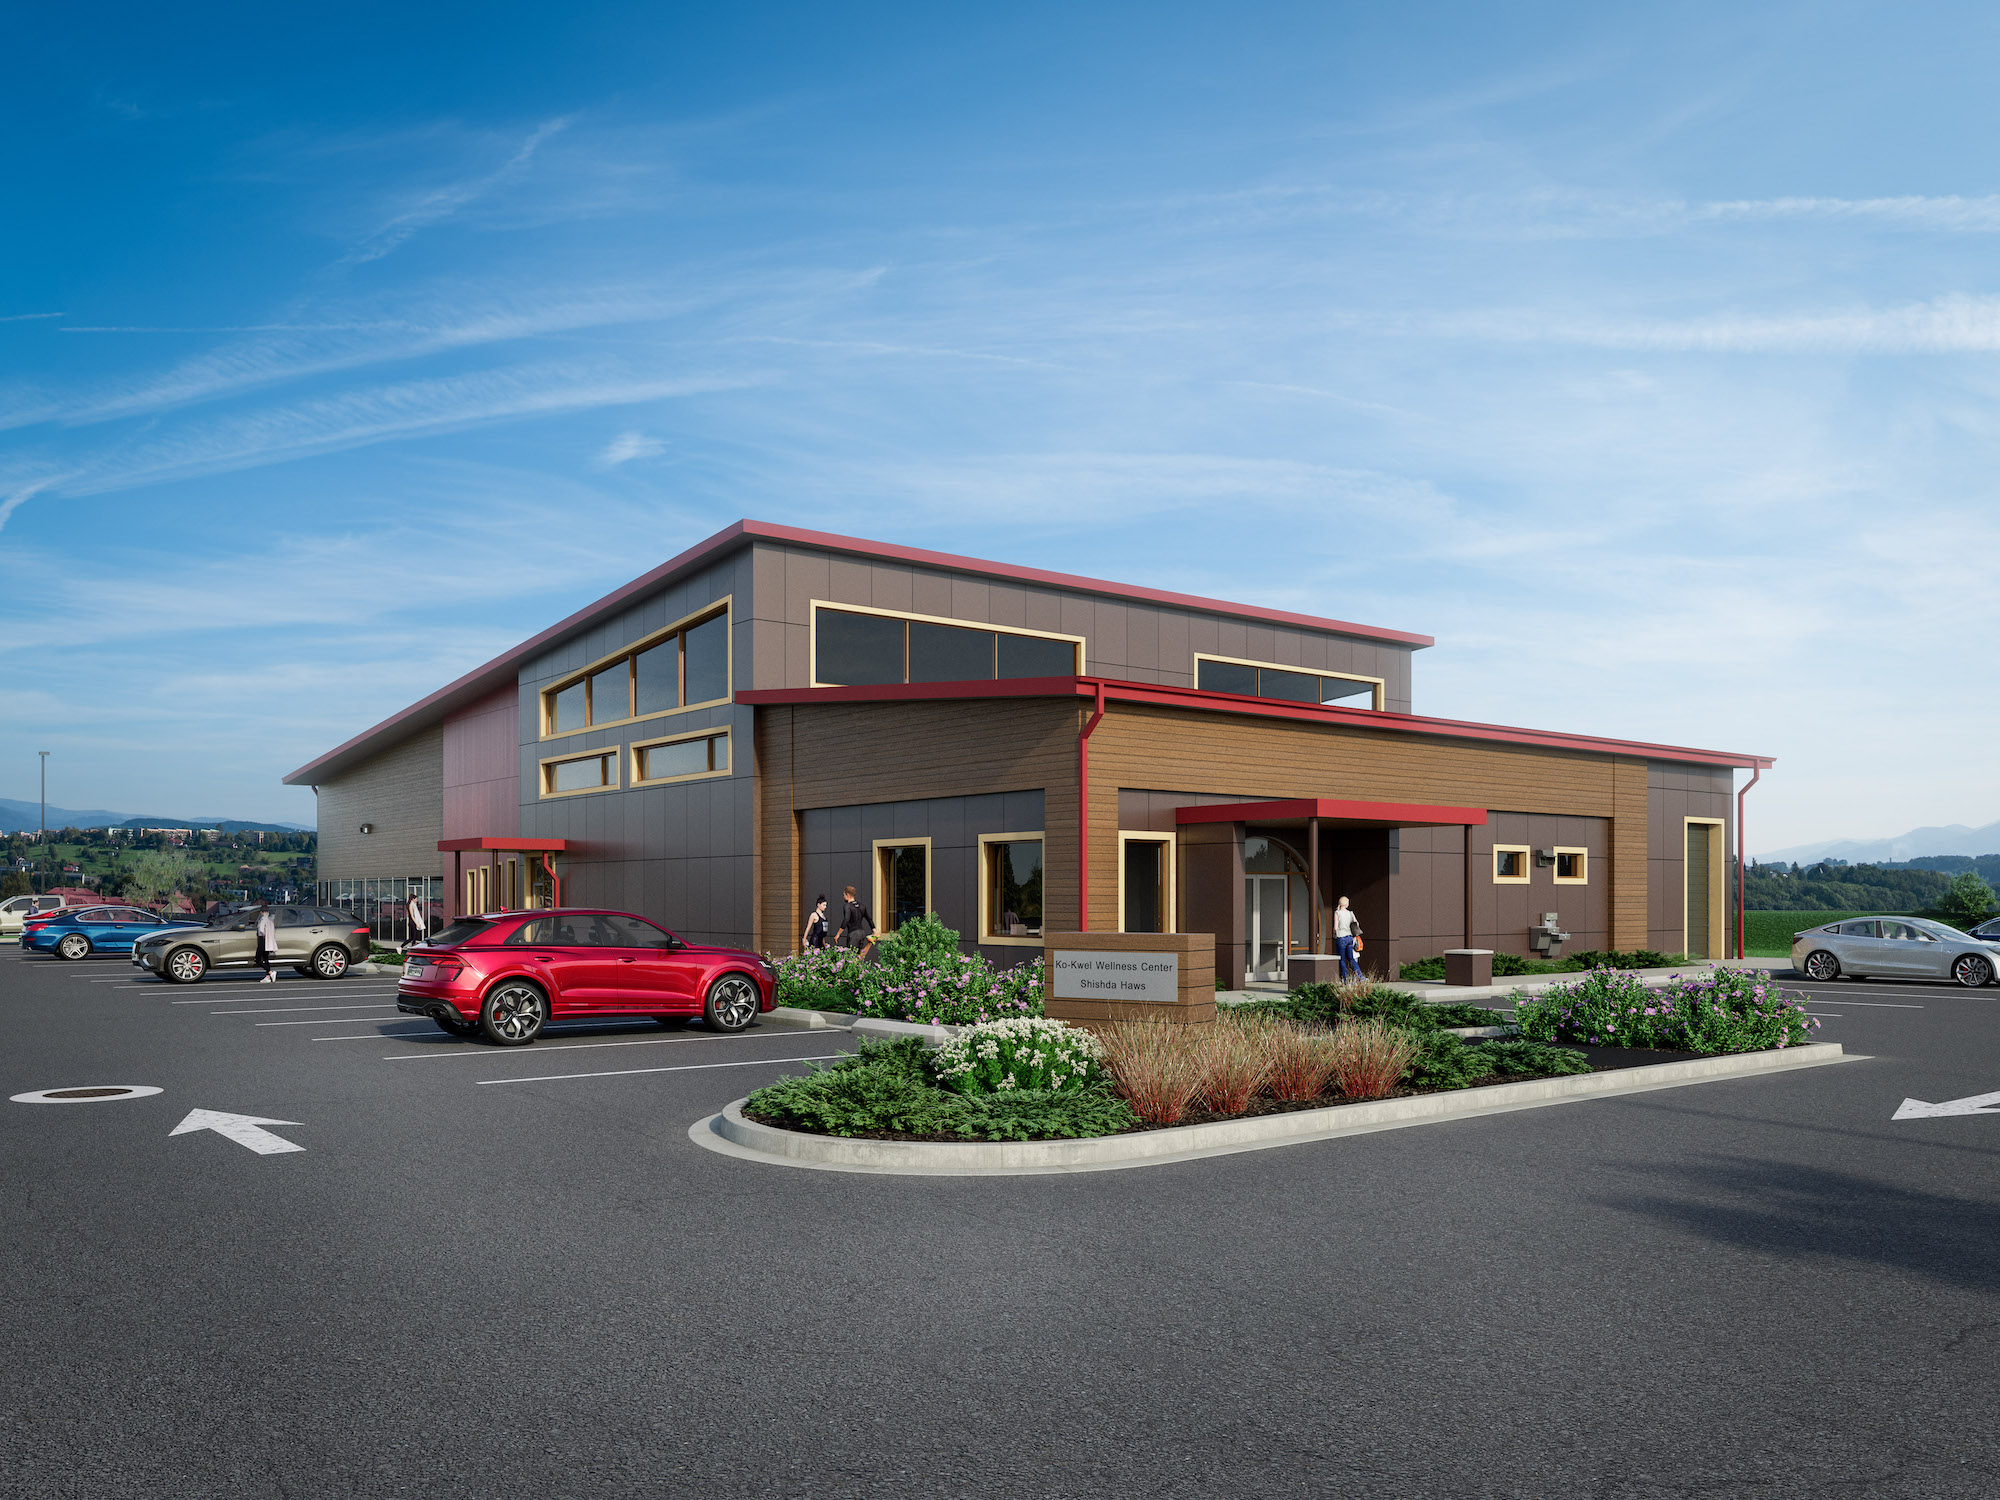 Rendering for the Ko-Kwel Rehabilitation and Fitness Center in Coos Bay, Oregon